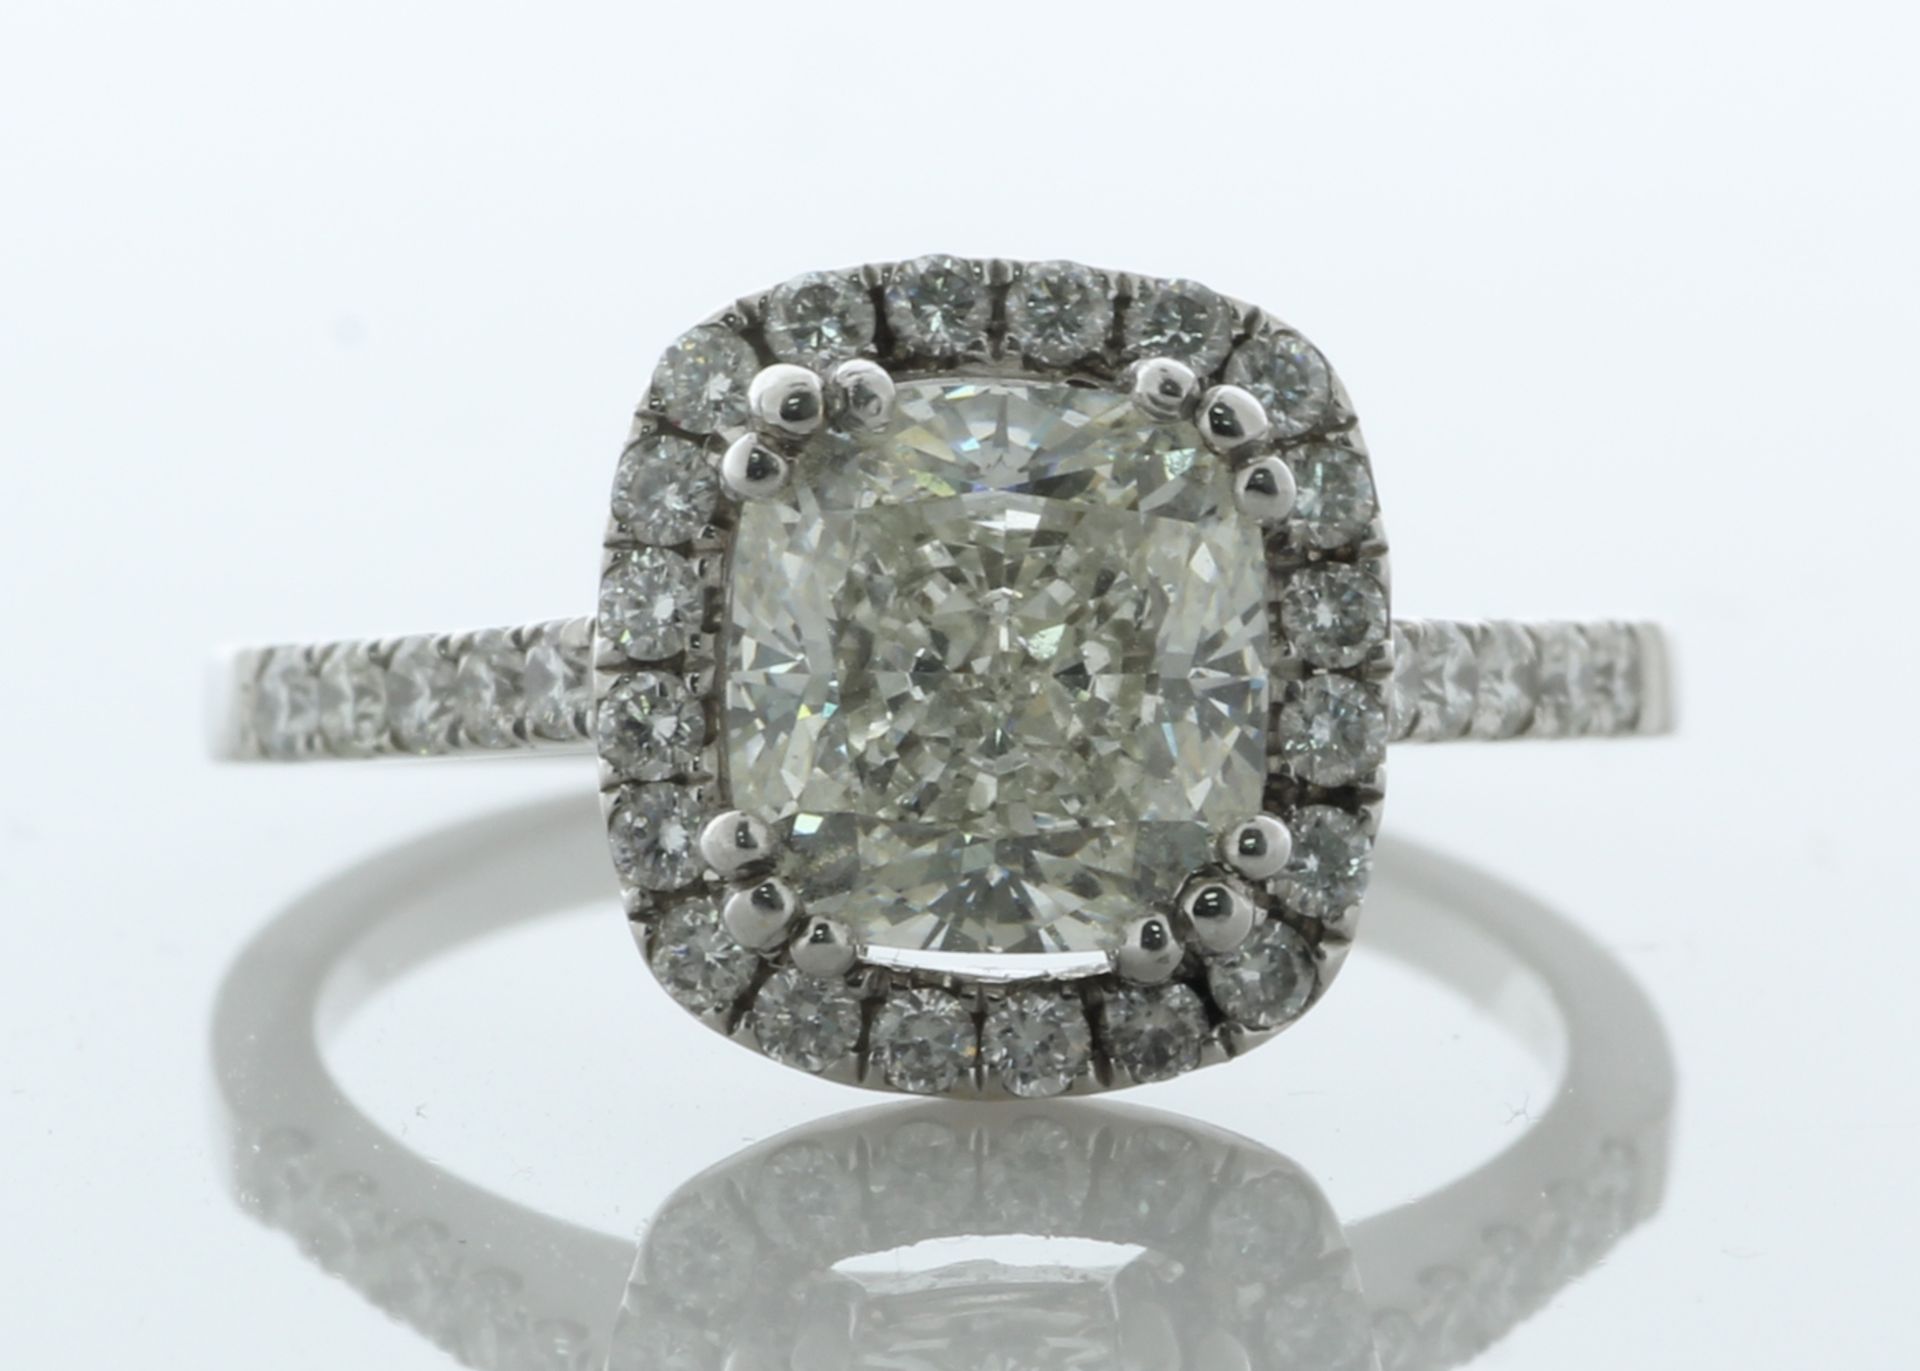 18ct White Gold Single Stone Cushion Cut Diamond Ring (2.13) 2.65 Carats - Valued by GIE £103,450.00